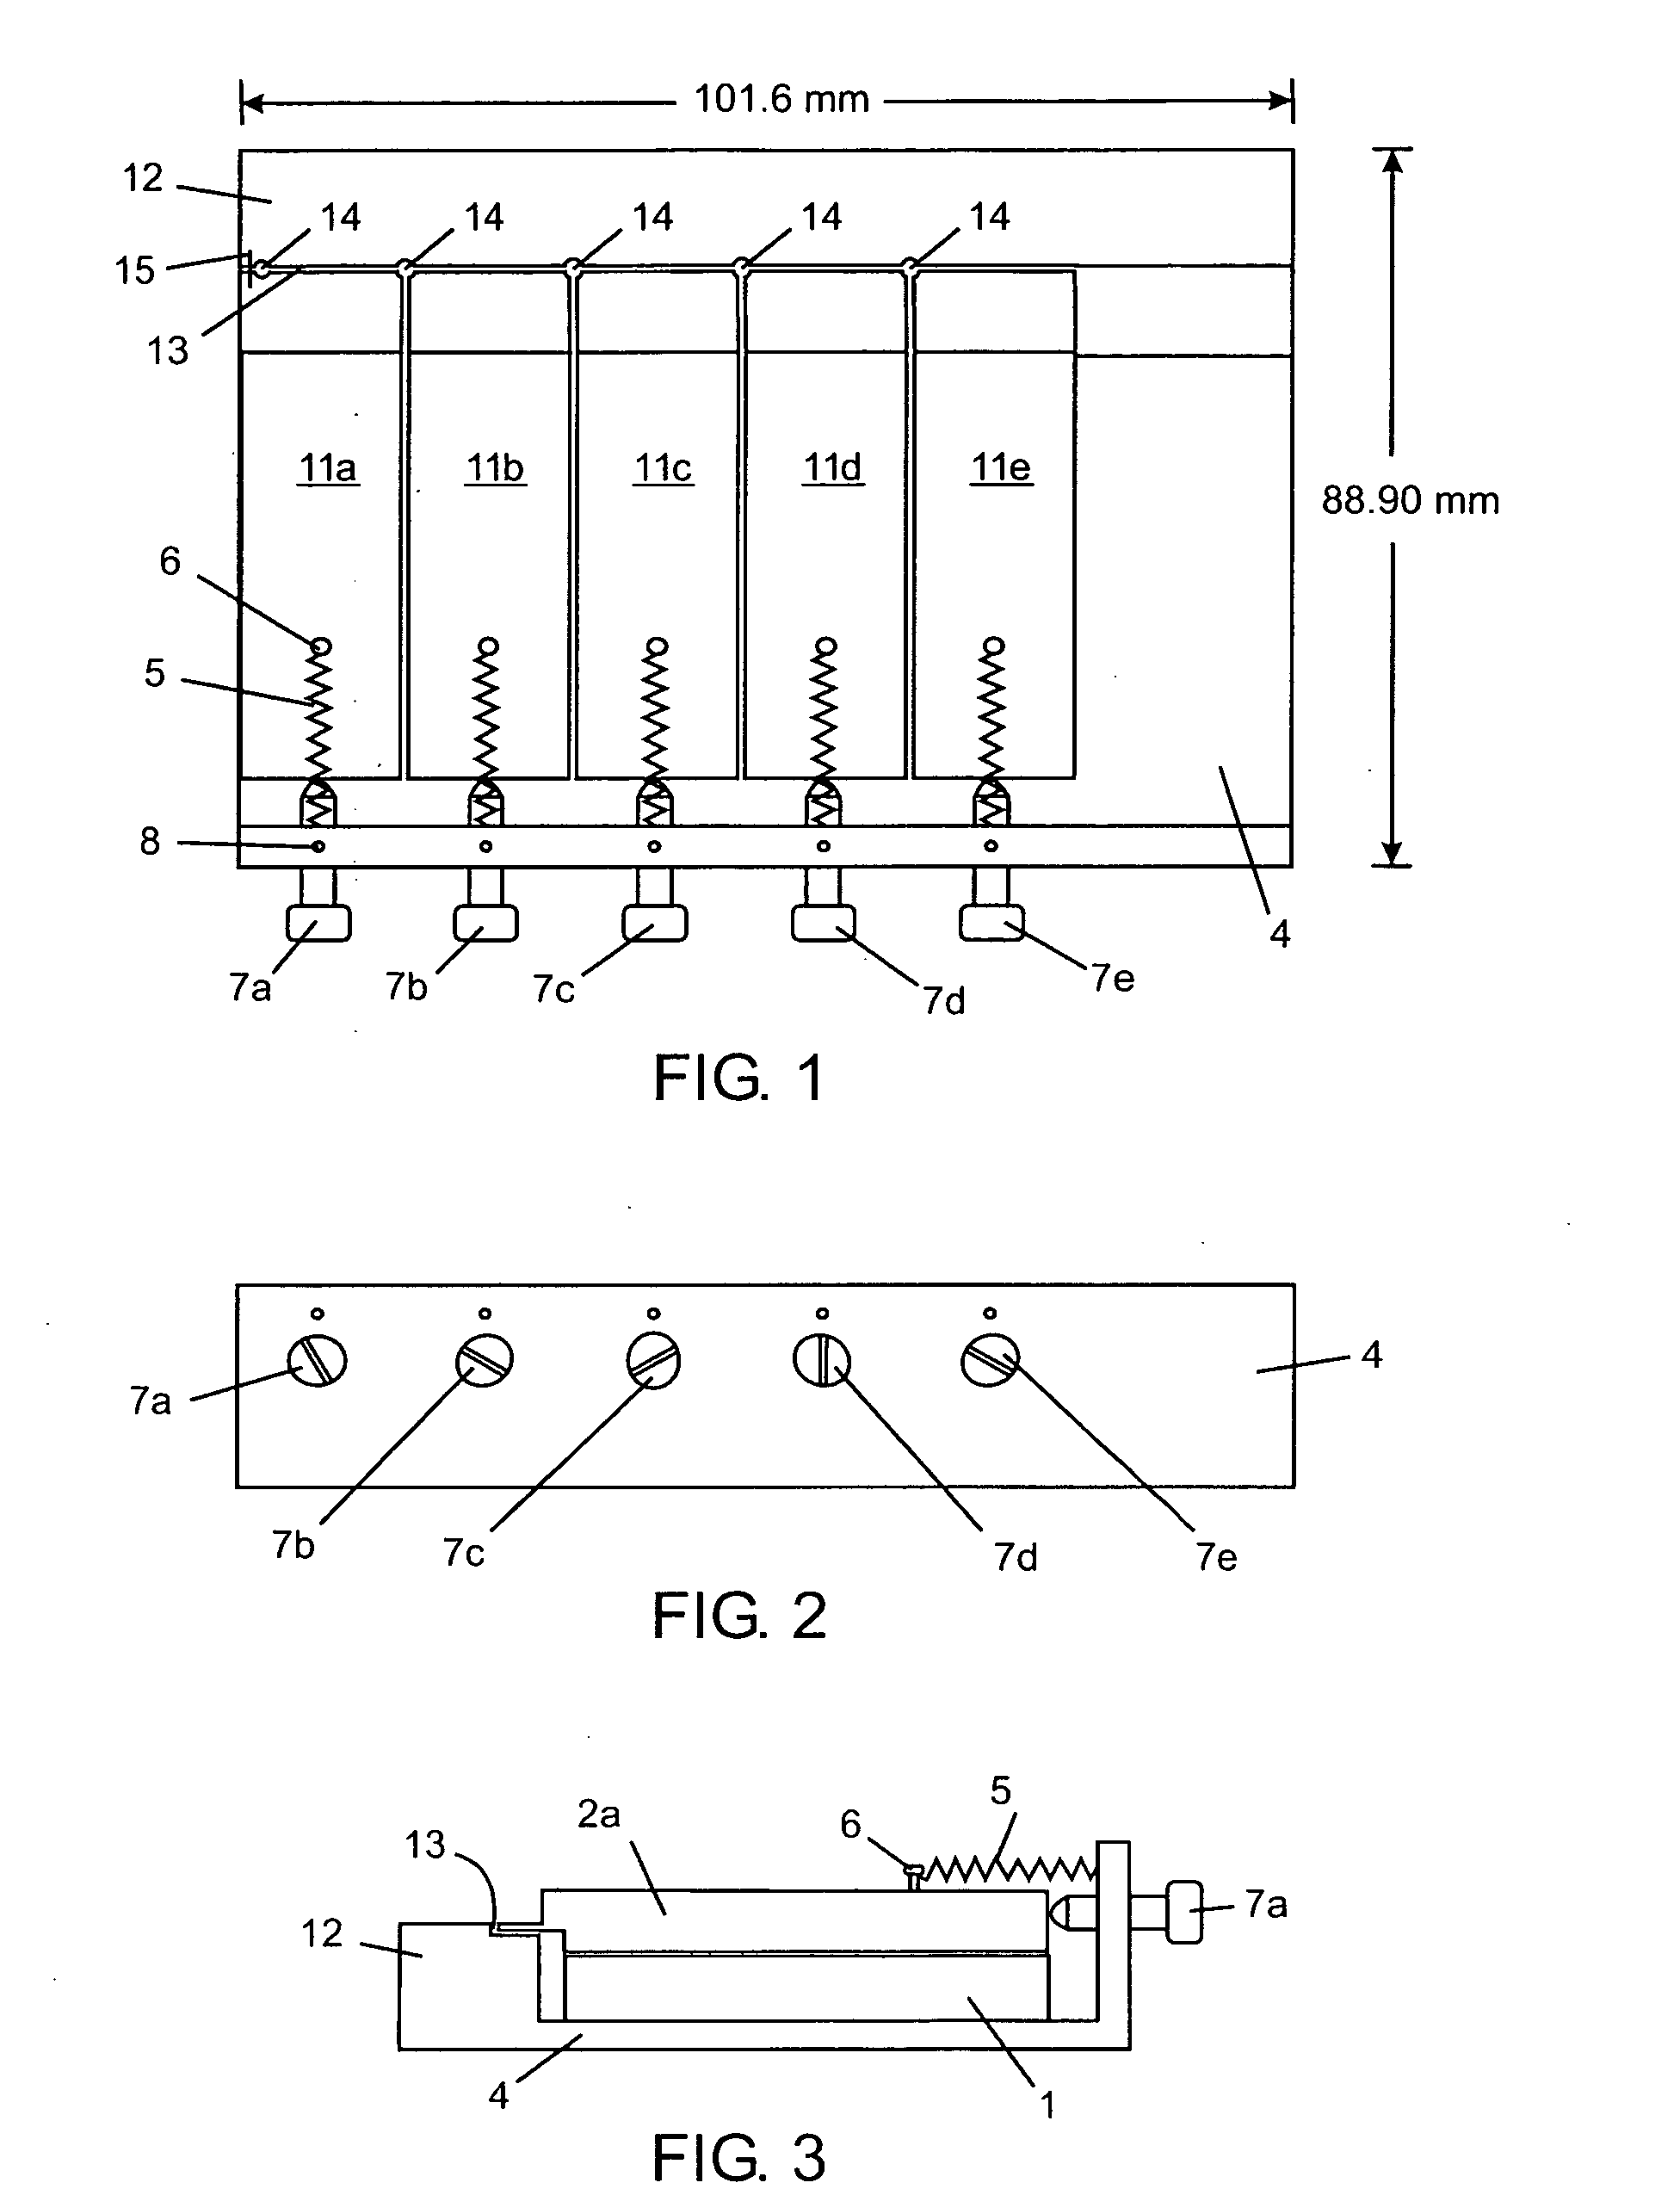 Apparatus and process for stacking pieces of material